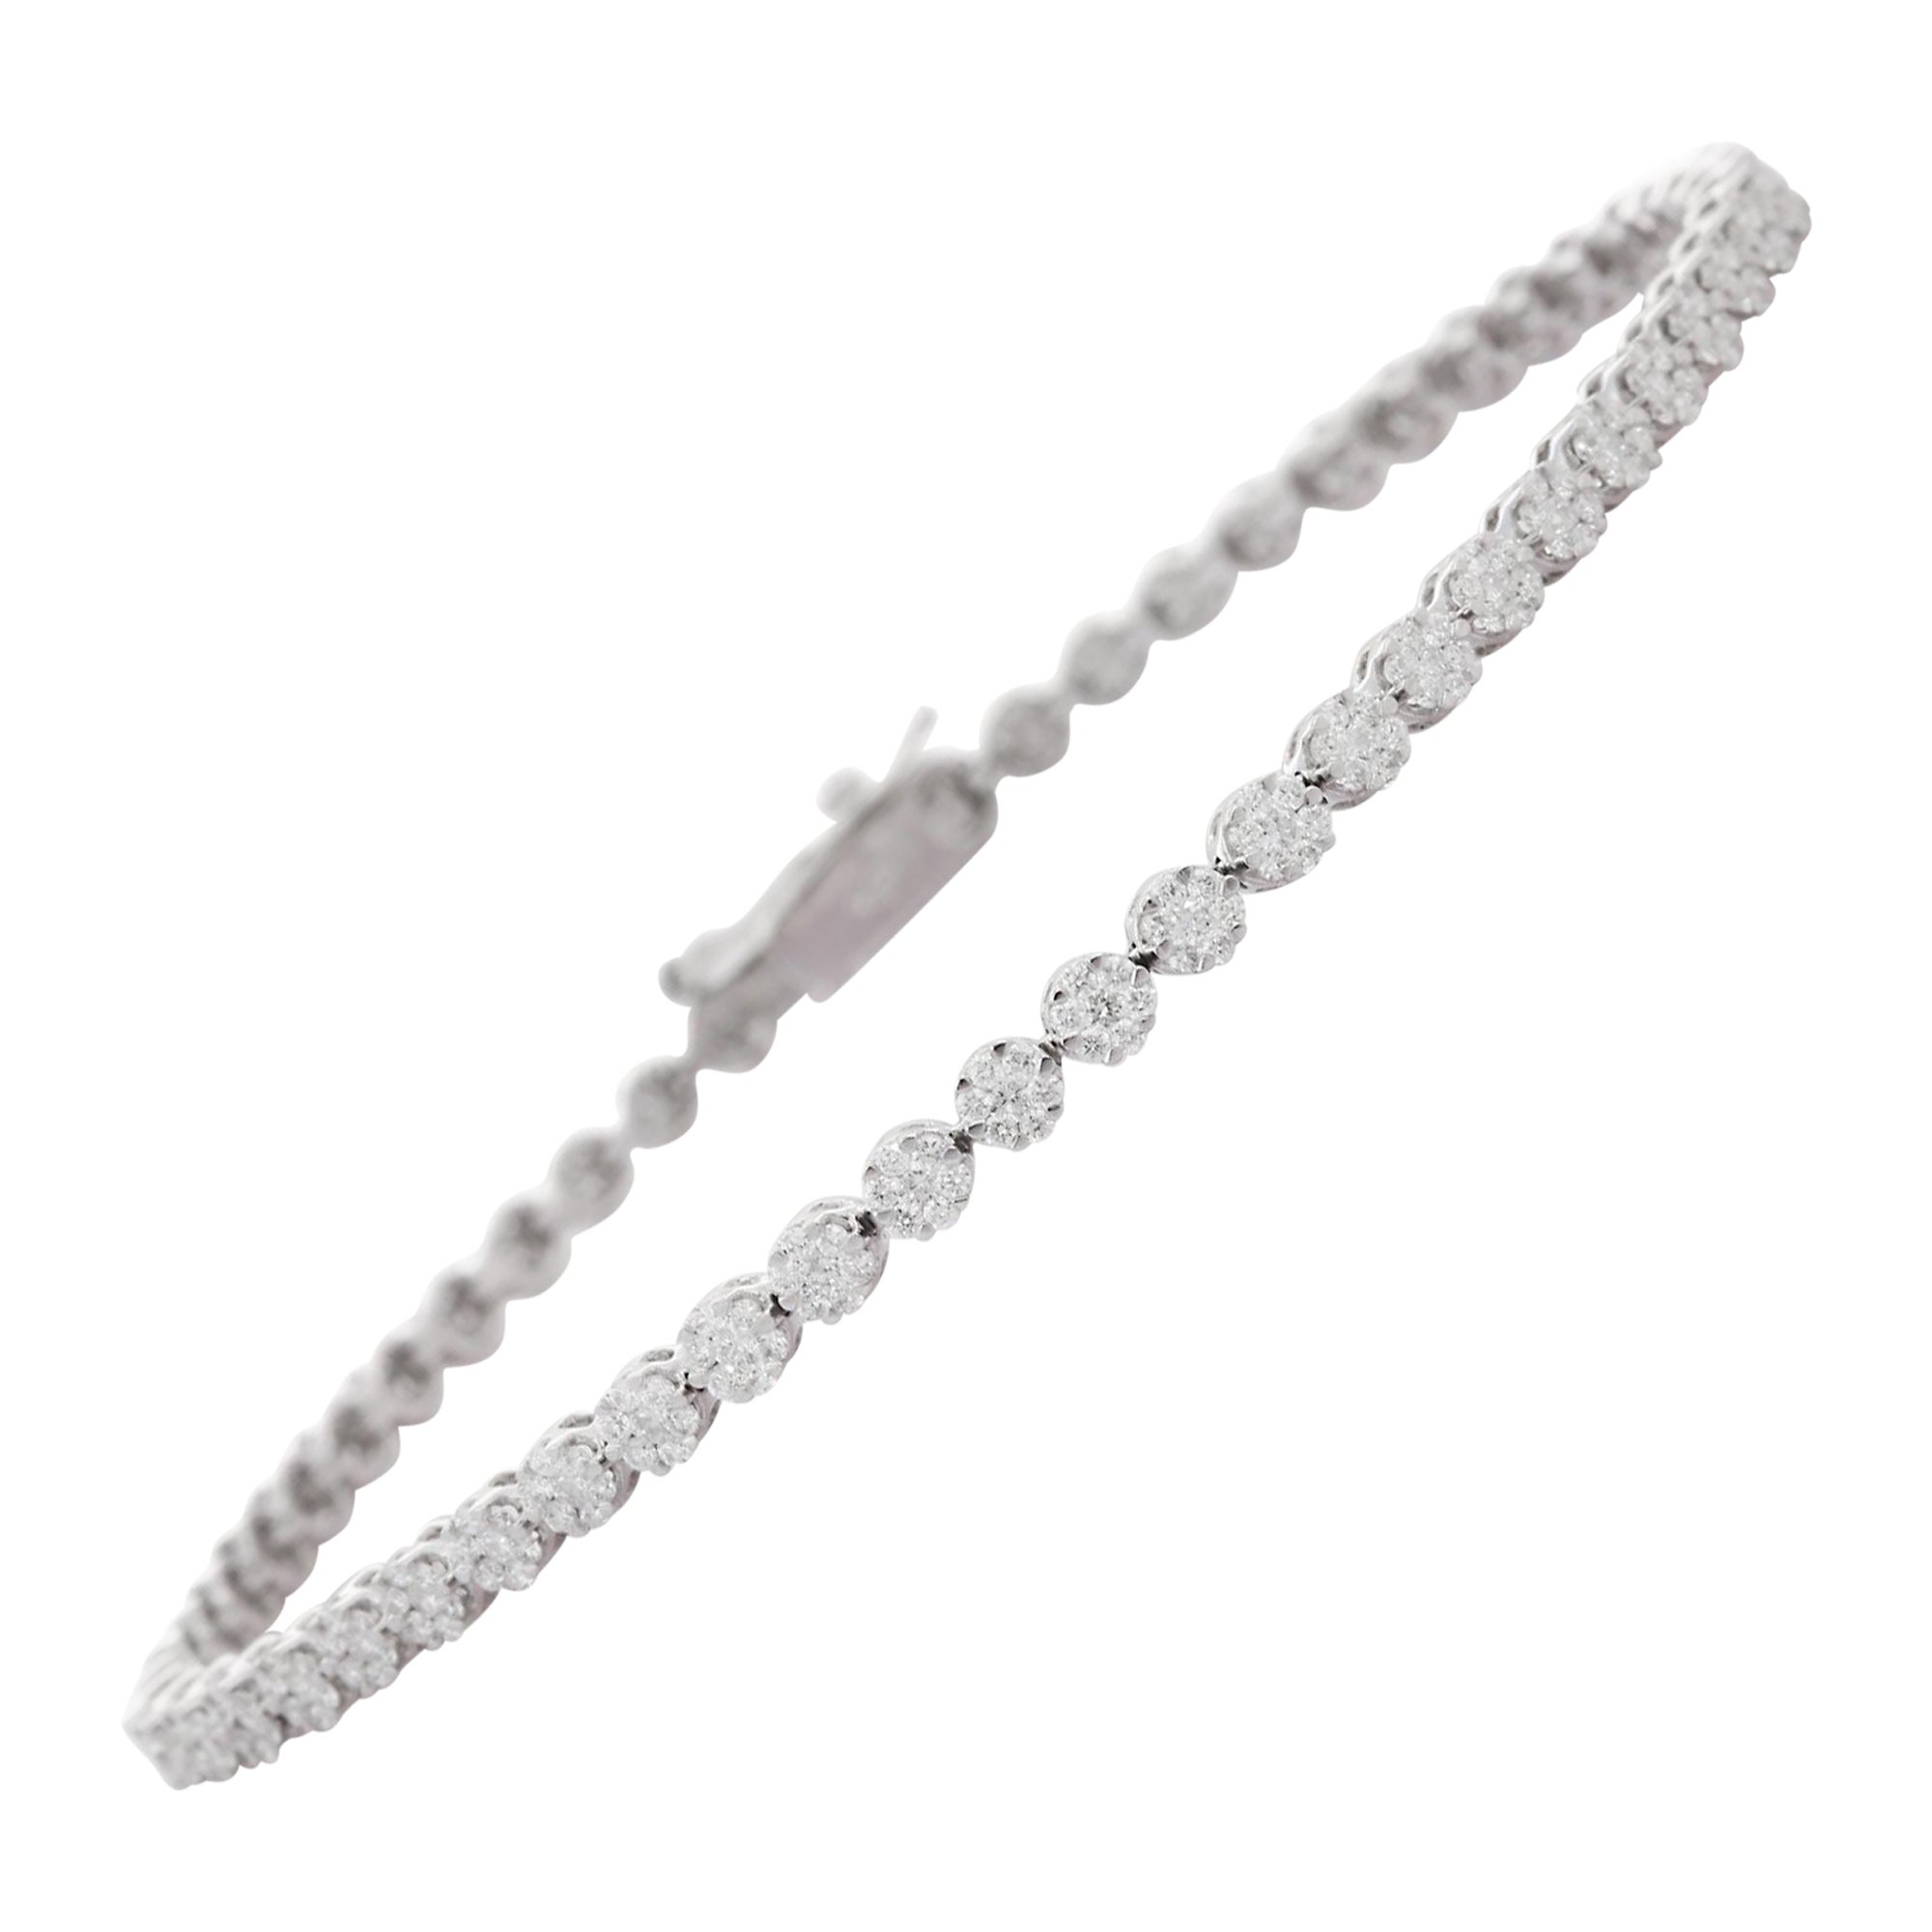 This Dainty Diamond Cluster Tennis Bracelet in 18K gold showcases sparkling natural diamonds, weighing 2.01 carats. 
April birthstone diamond brings love, fame, success and prosperity.
Designed with diamonds cluster set in continuation to make you